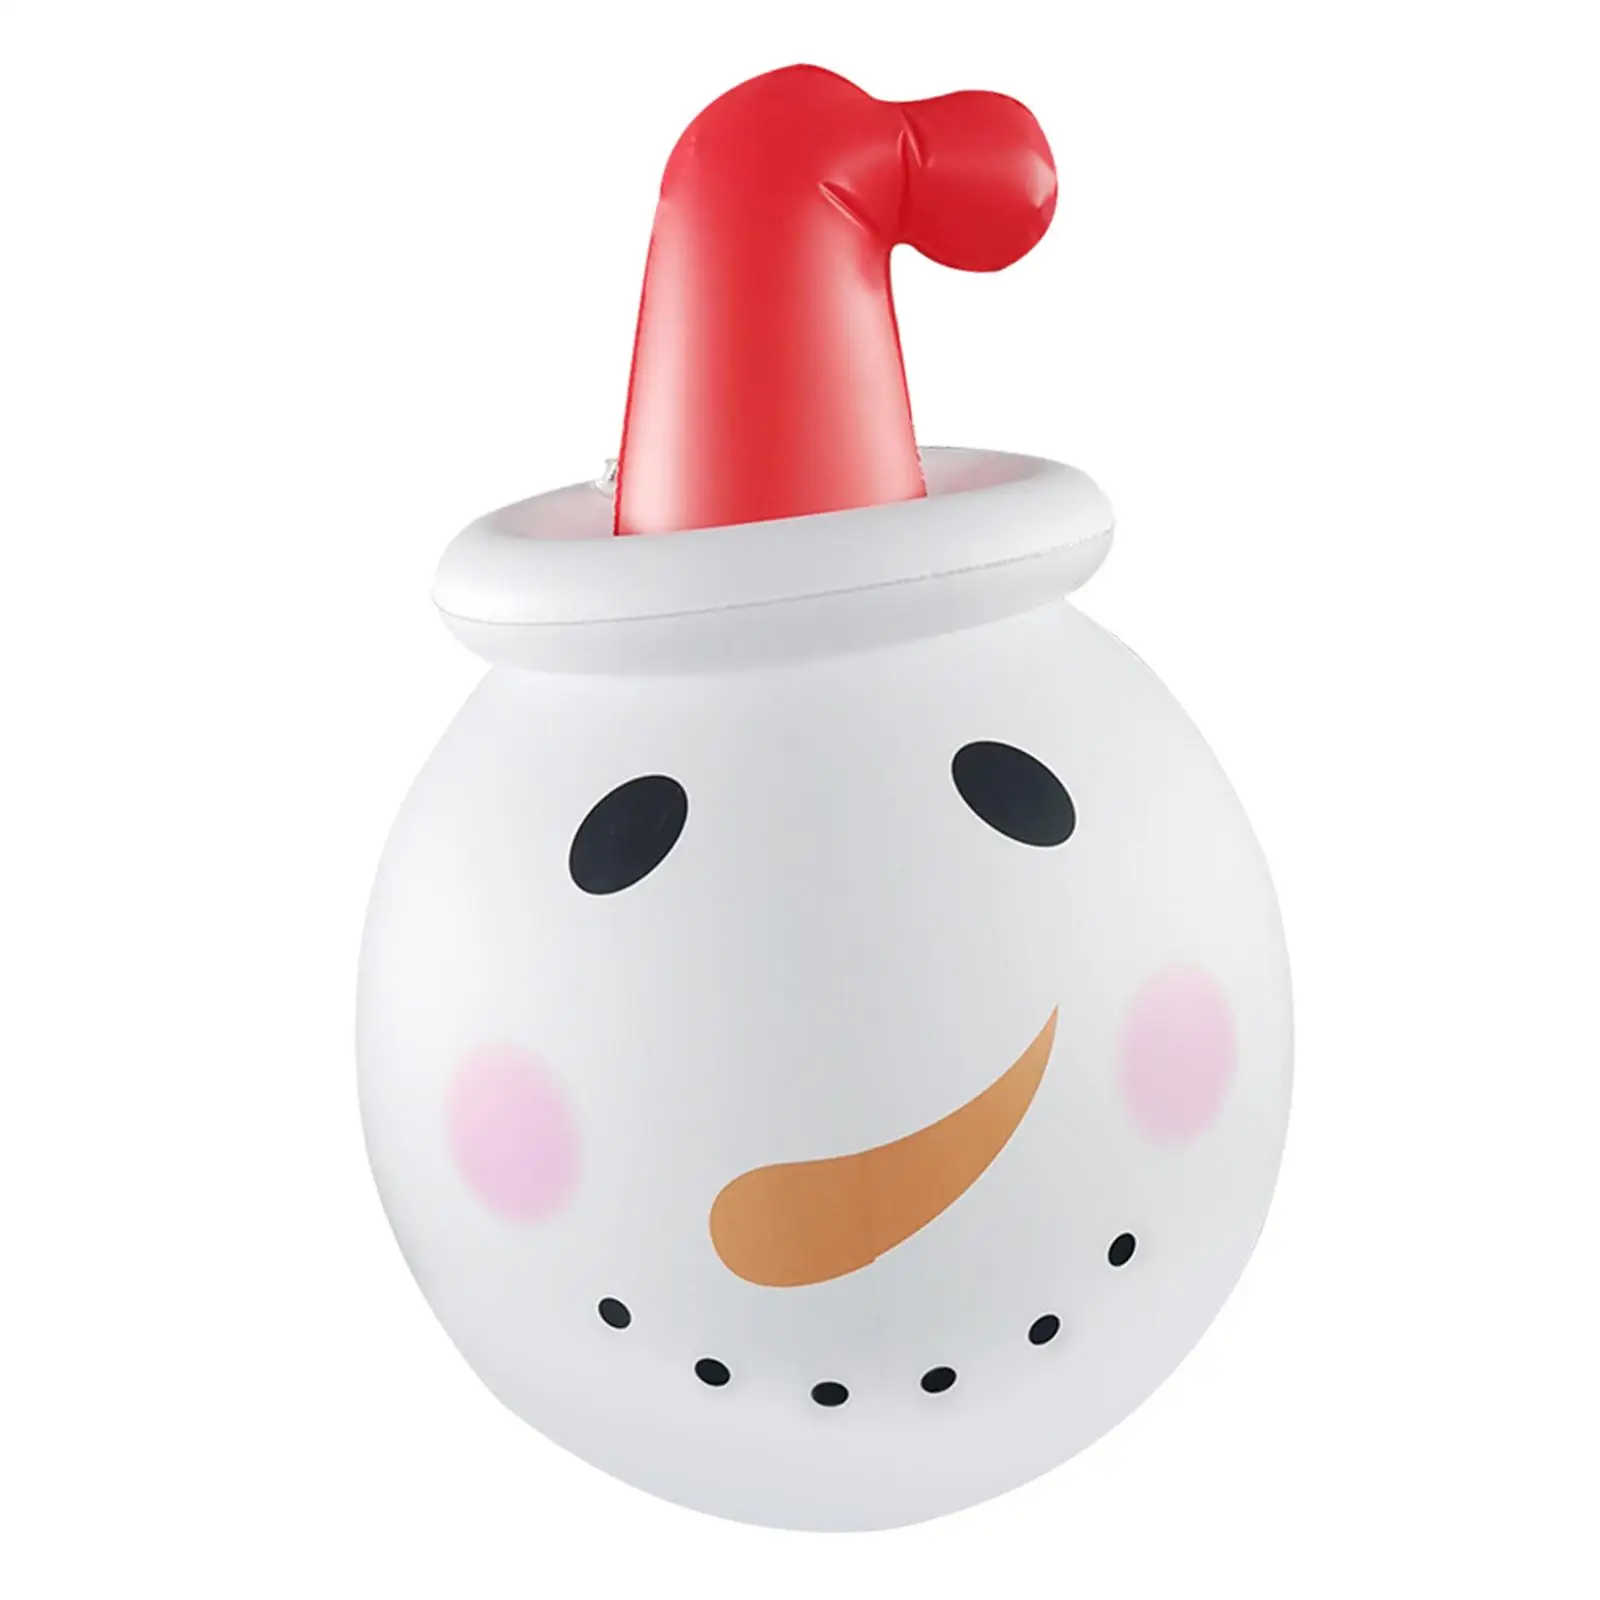 Christmas Inflatable Snowman Ornament with Light for Lawn Cafe Living Room